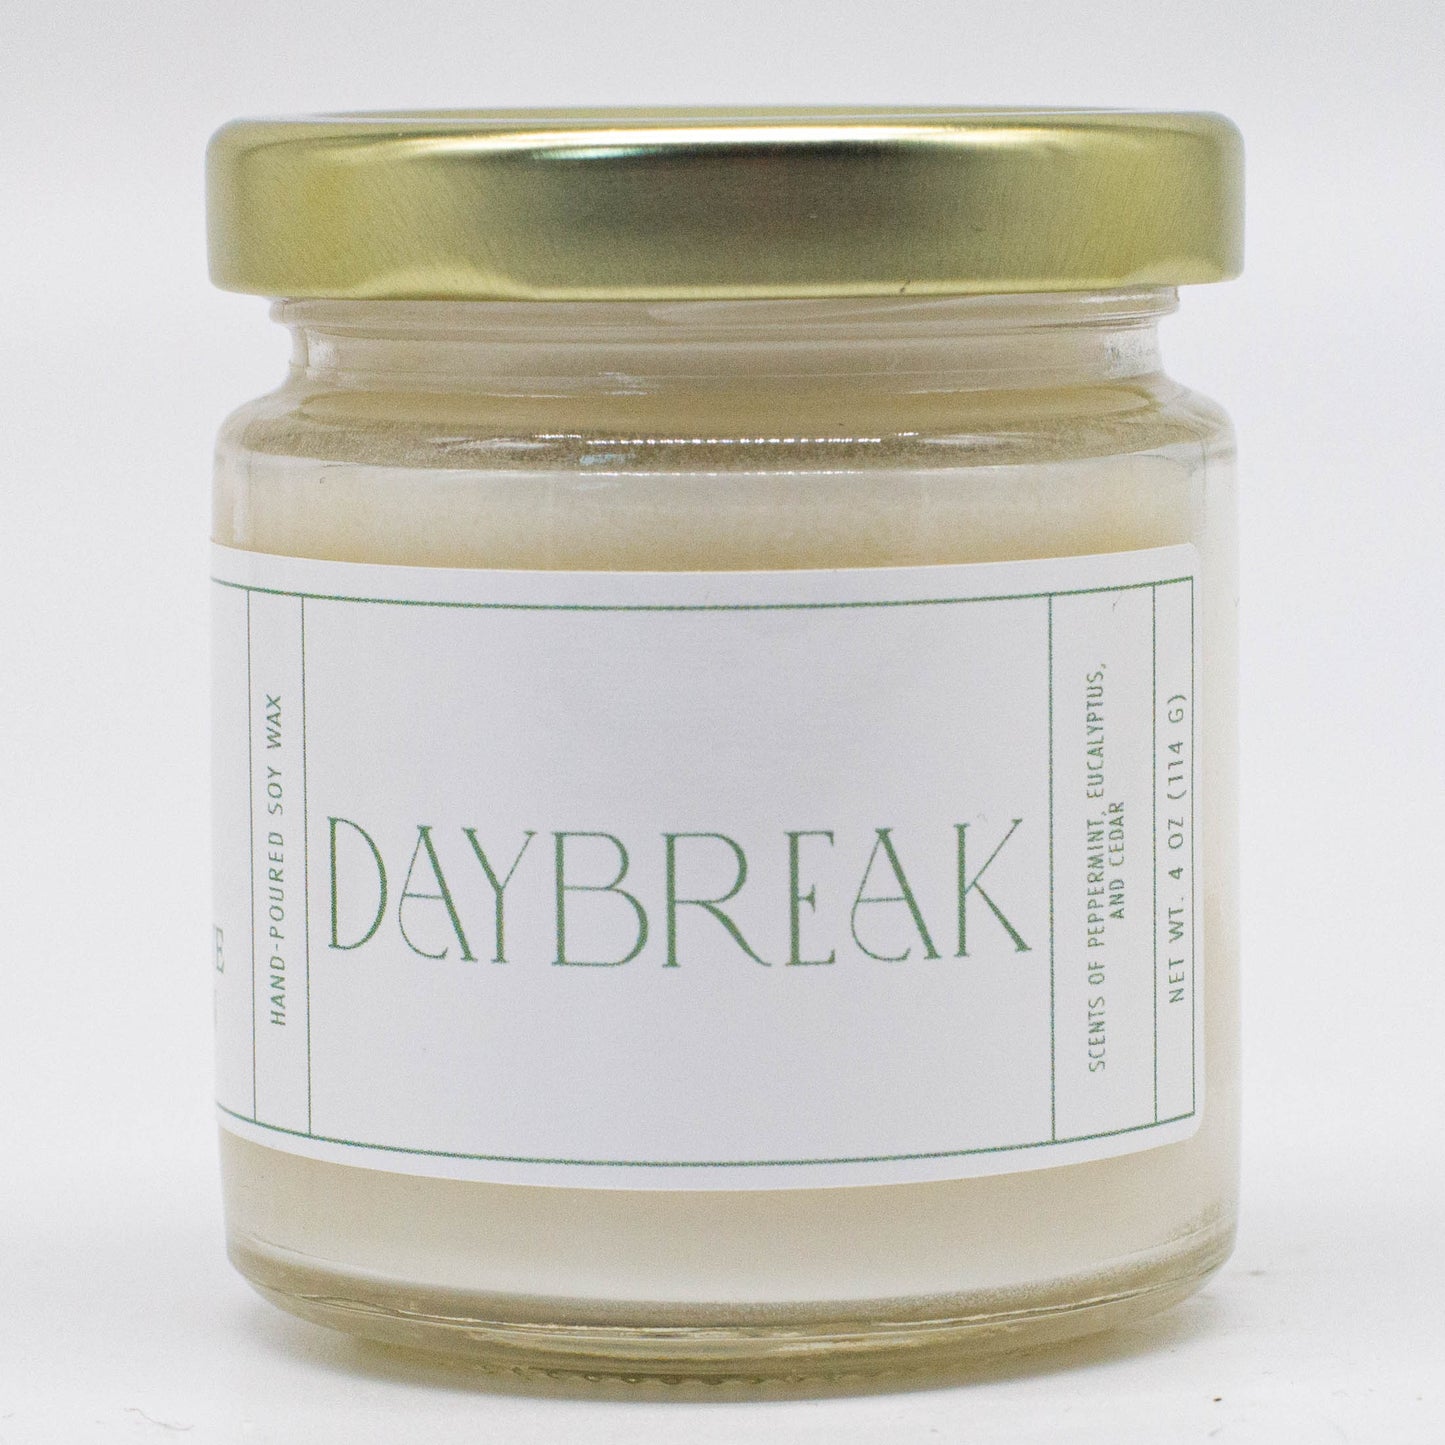 Daybreak, Peppermint and Eucalyptus Soy Candle, 4 oz